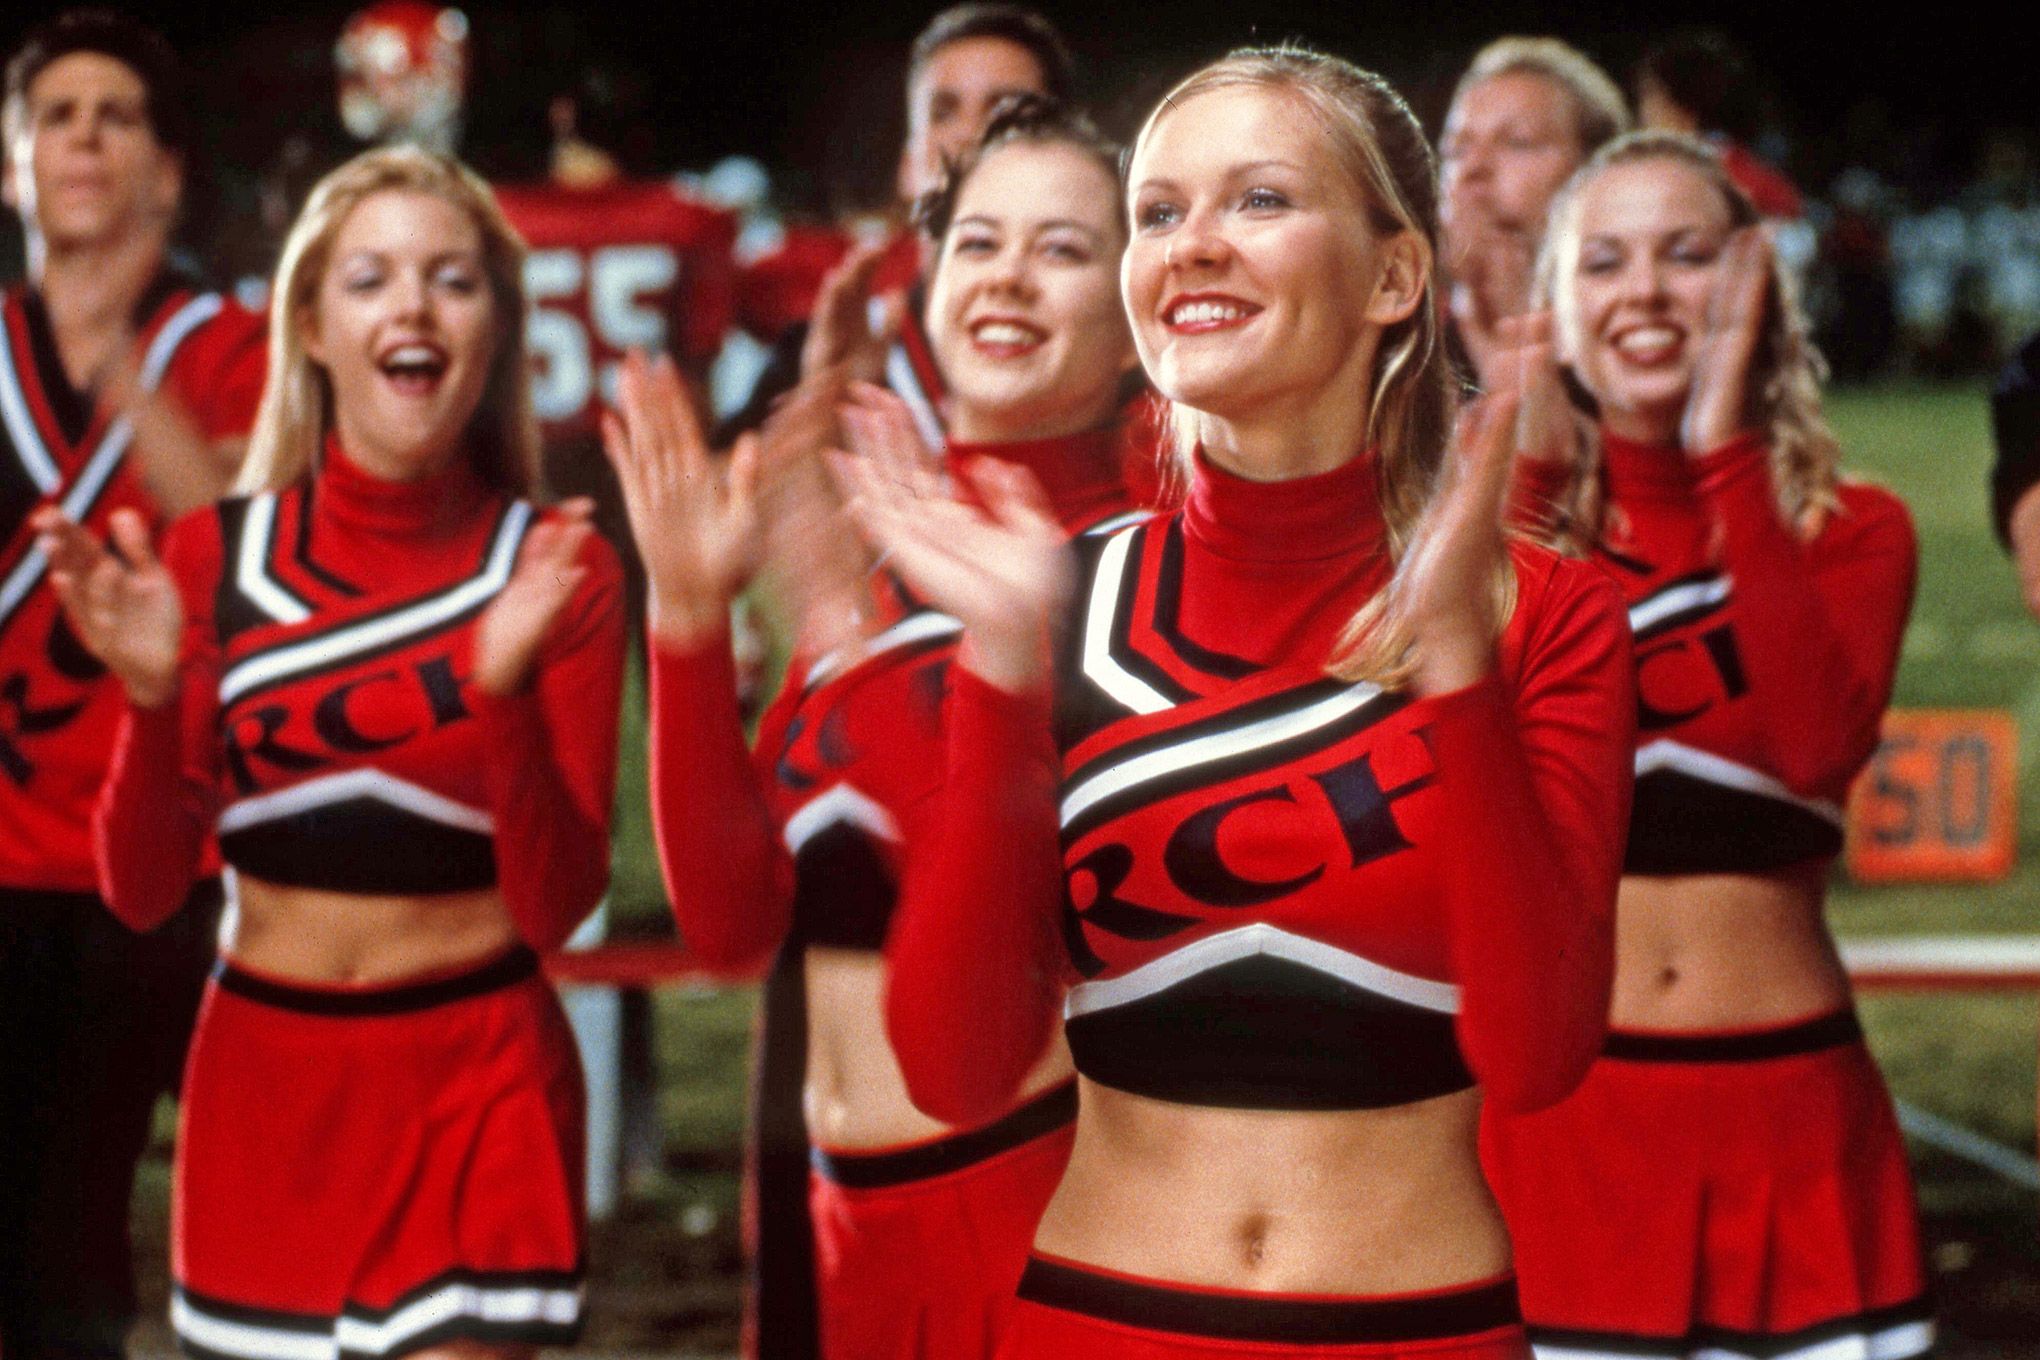 60 Best High School Movies - 60 Teen Movies to Watch Right Now